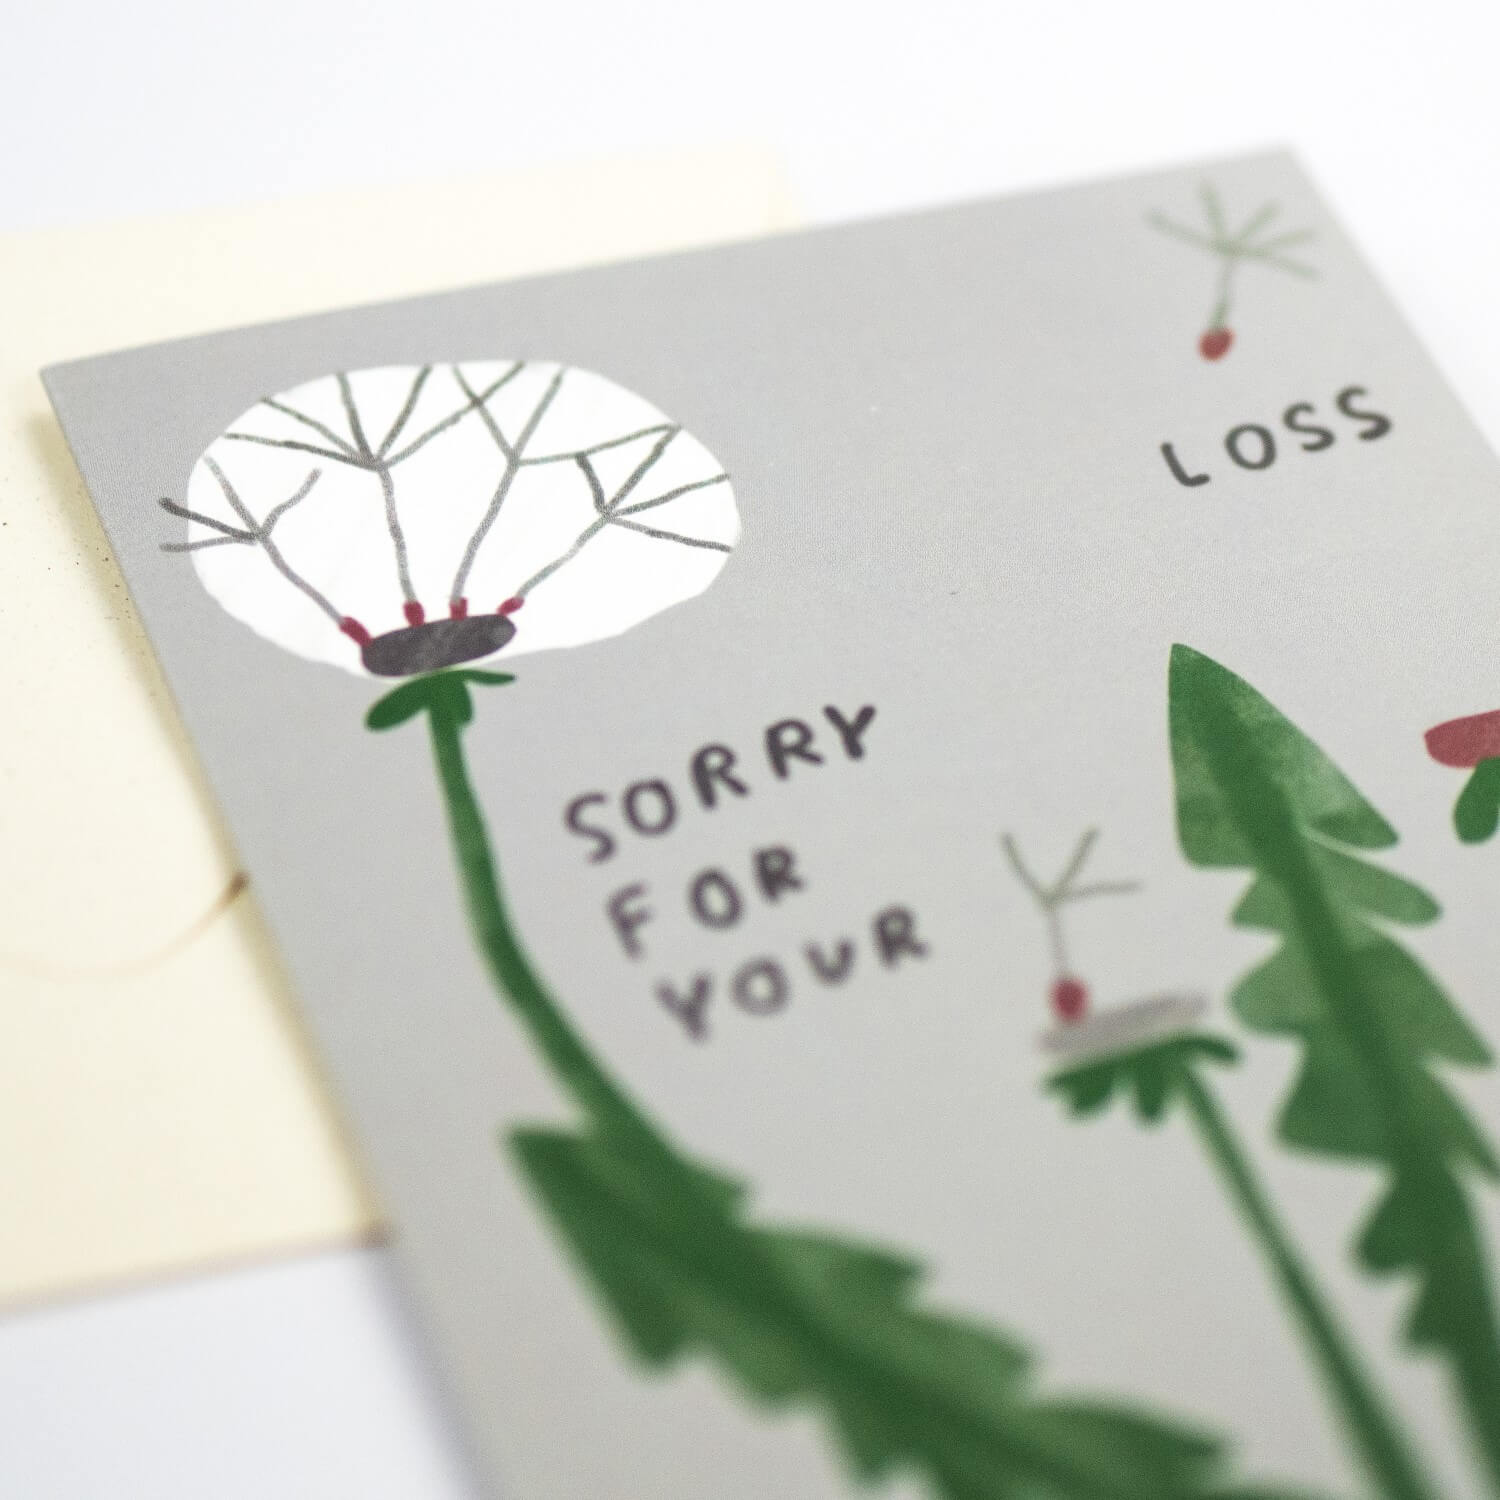 Sorry For Your Loss Greetings Card